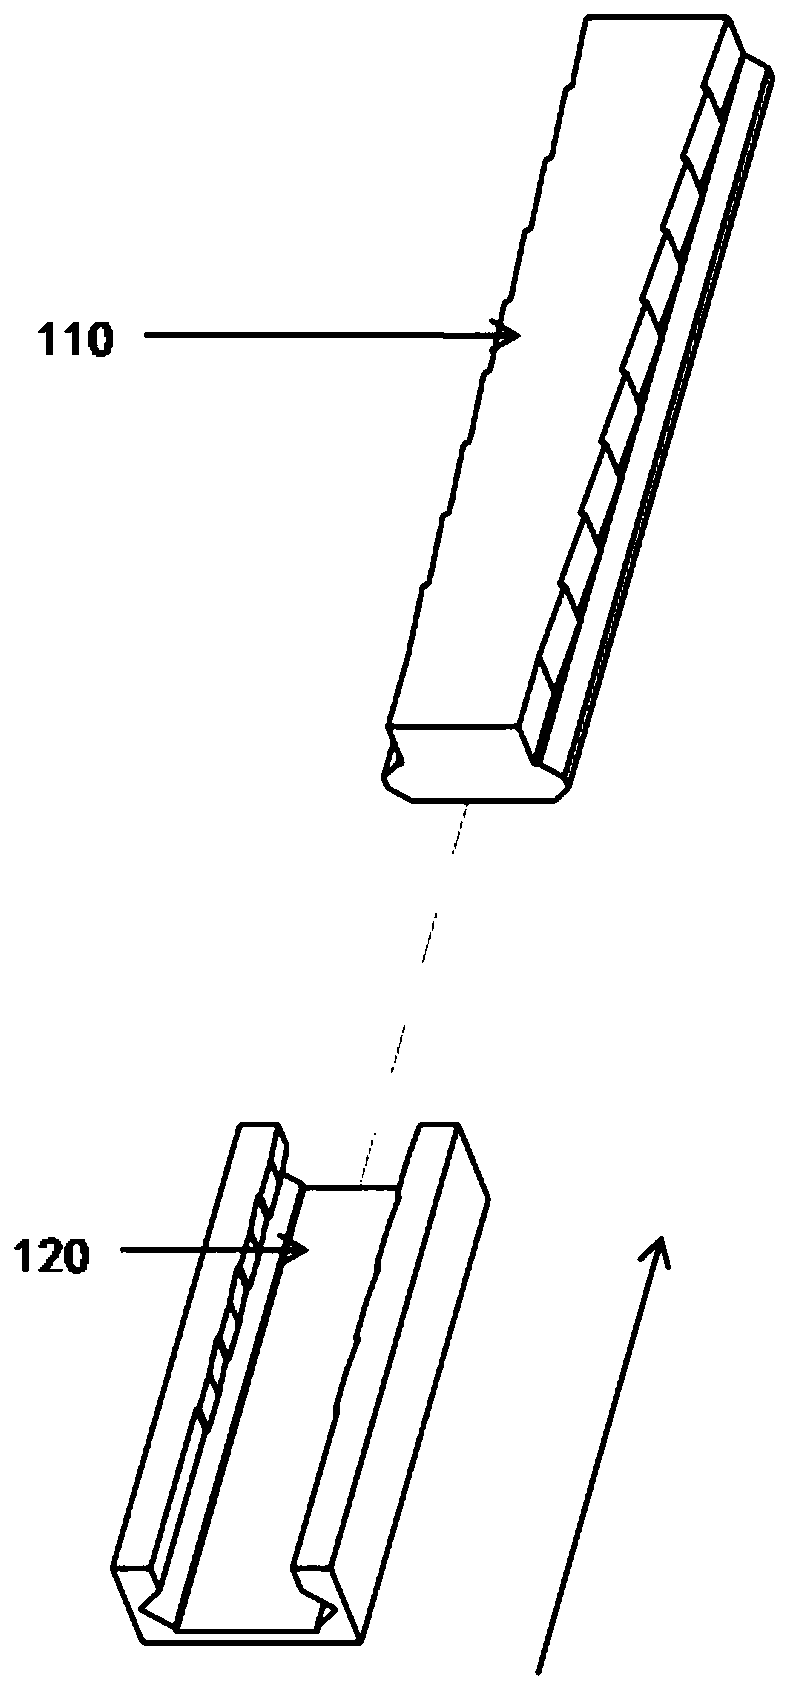 A universal connector for electronic equipment